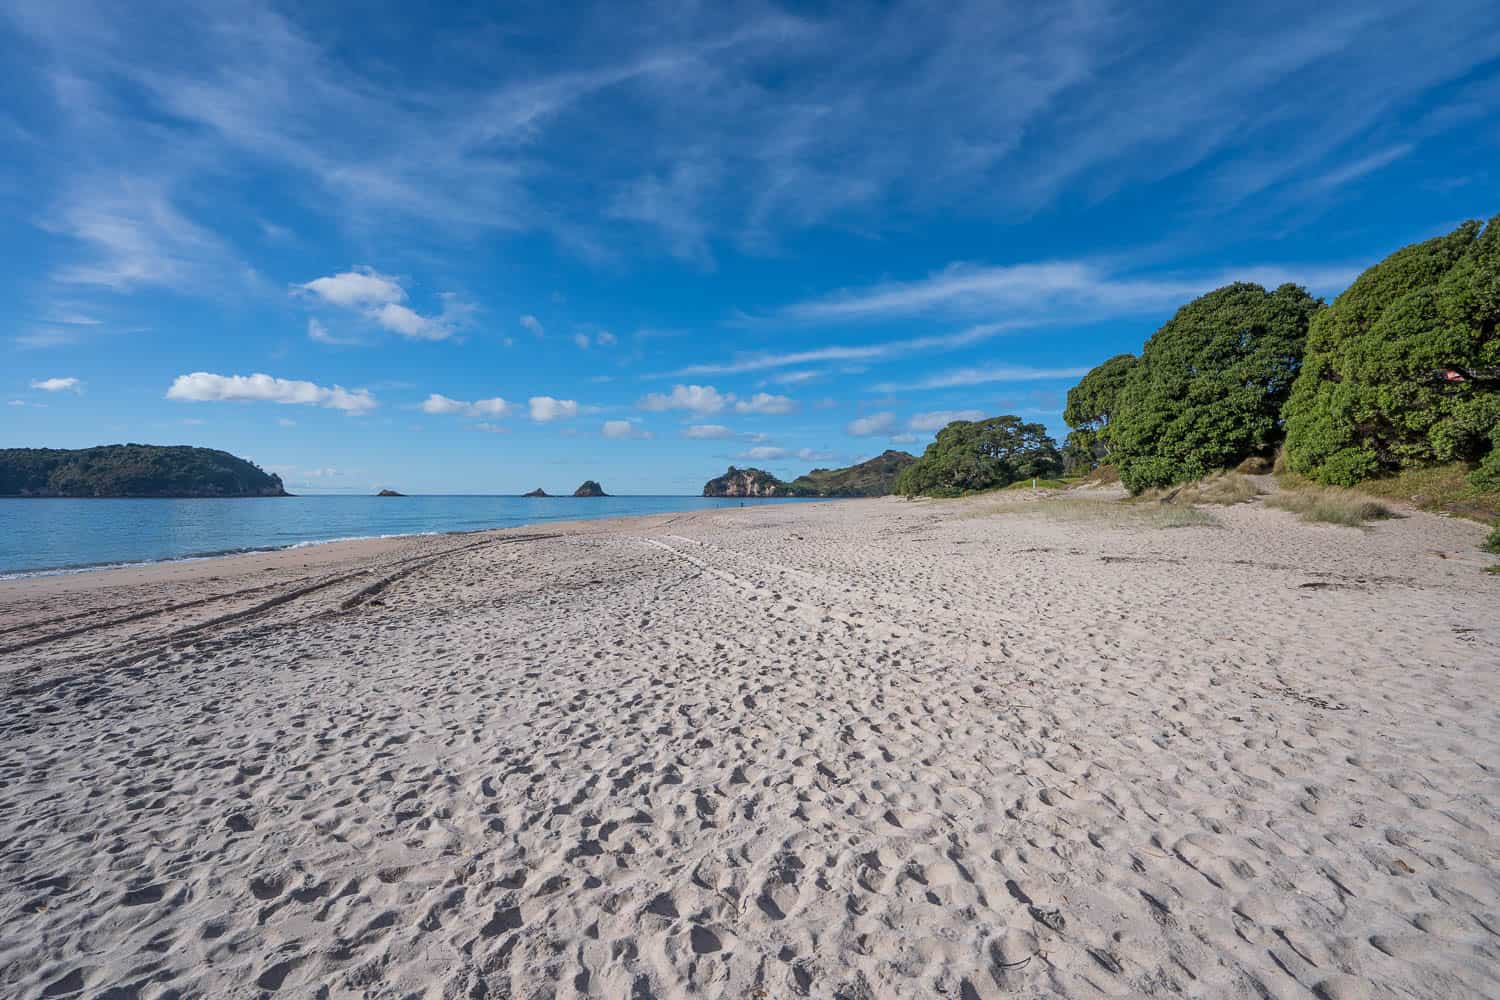 Hahei Beach in the Coromandel, one of the best places on a New Zealand North Island road trip